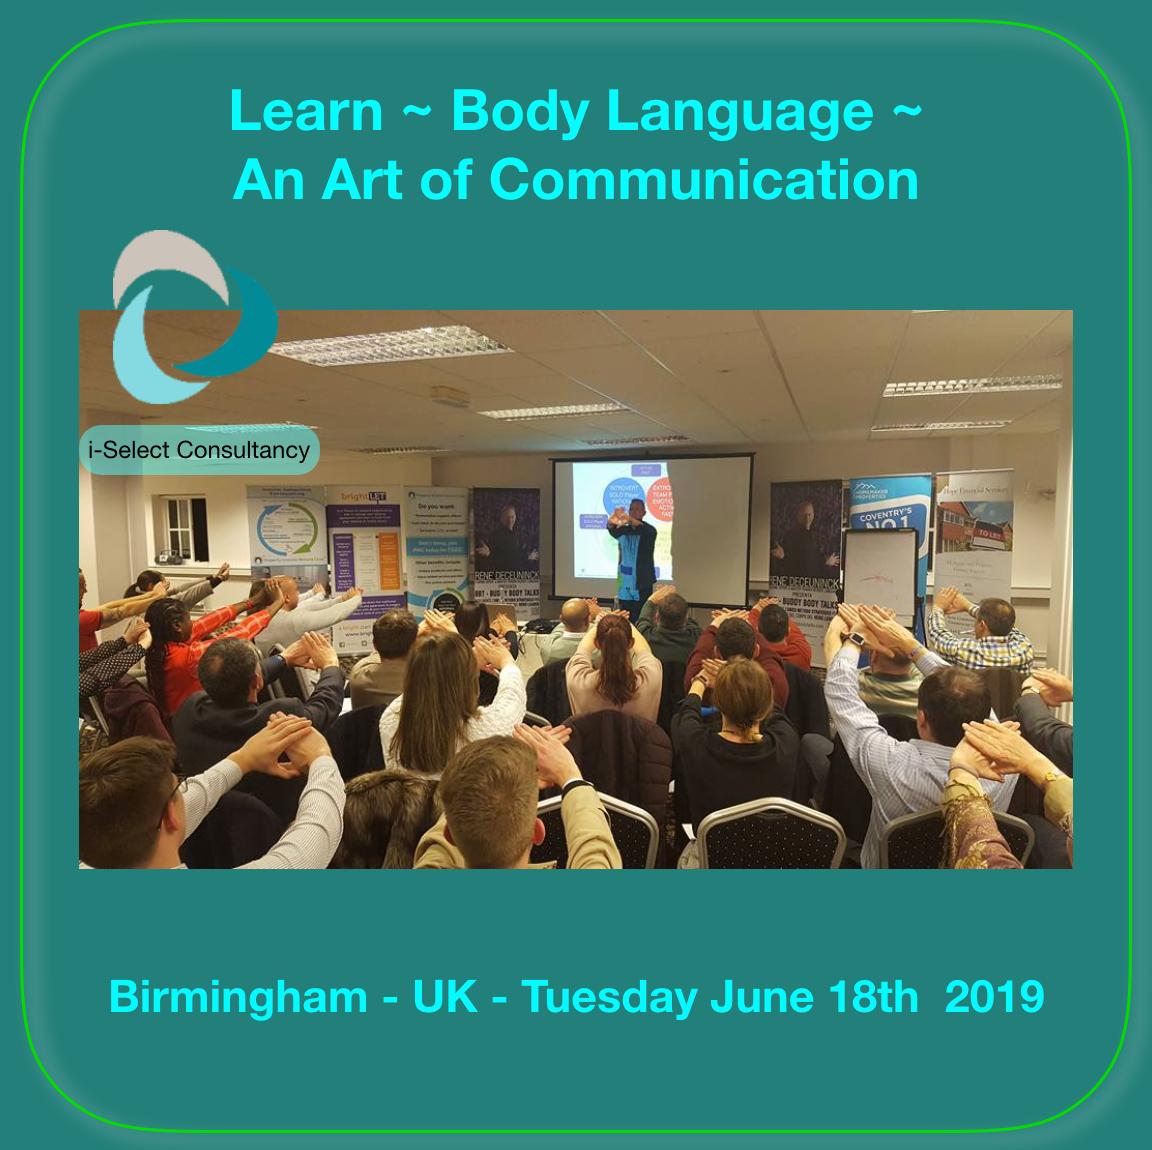 Have you booked your place? You can book today here at lnkd.in/gu6WZ5s #booktoday #bodylanguage #communicationtraining @GrowB2BEvents @ukbizforums @BCLbusinessTV @BiznessReporter @networkwm @HMGMidlands @WestMids_CA @birminghamcg22